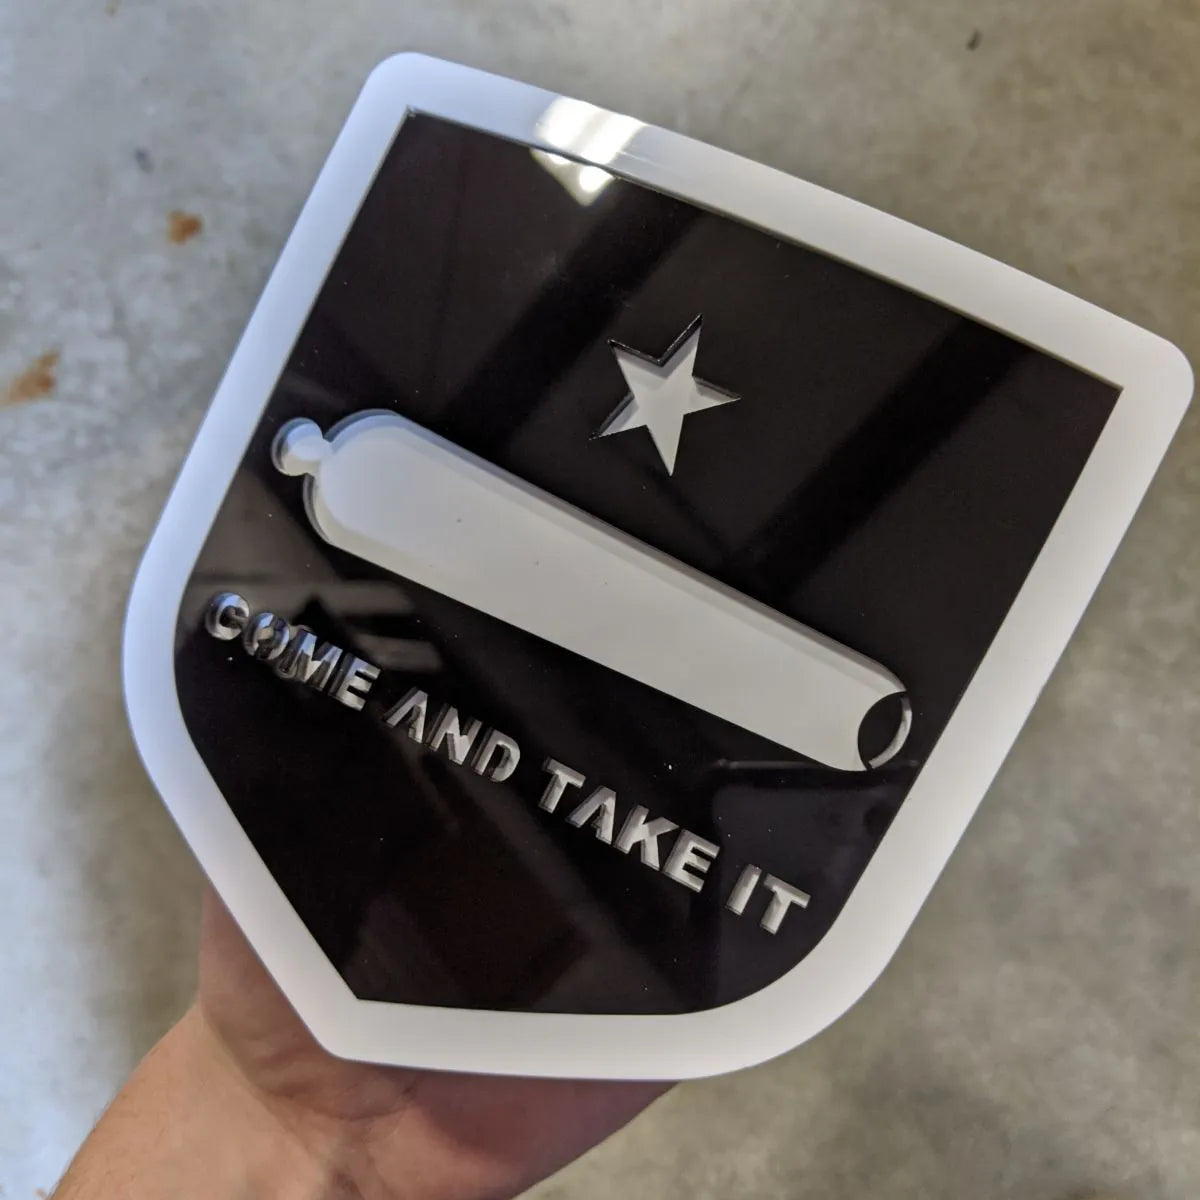 Come and Take It Badge - Fits 2009-2018 Dodge® Ram® Tailgate -1500, 2500, 3500 - Black and White